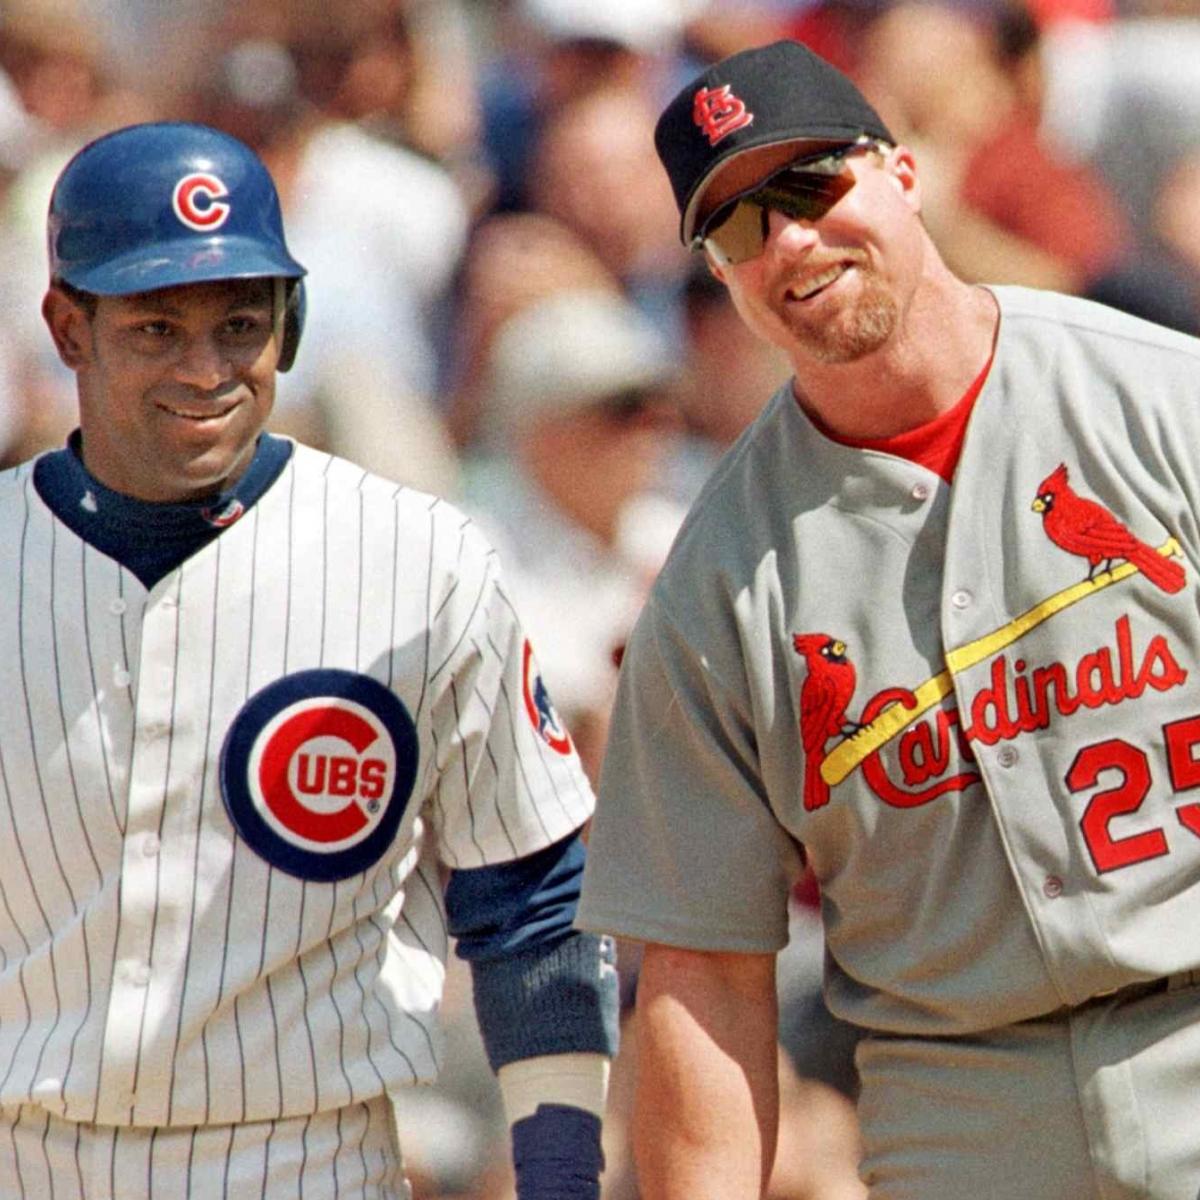 The McGwire-Sosa home run chase helped make 1998 one of MLB's